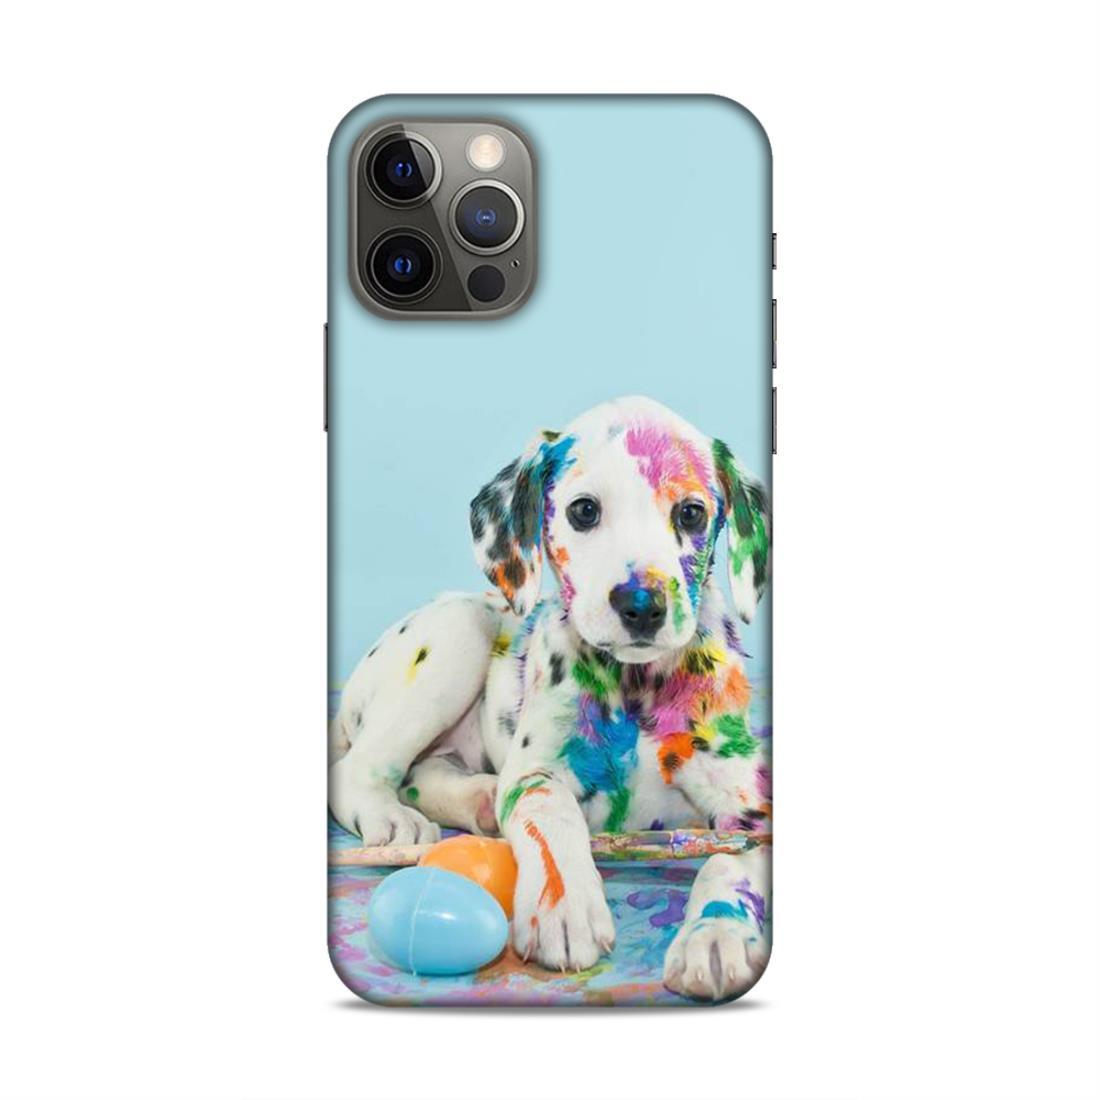 Cute Dog Lover iPhone 12 Pro Mobile Case Cover